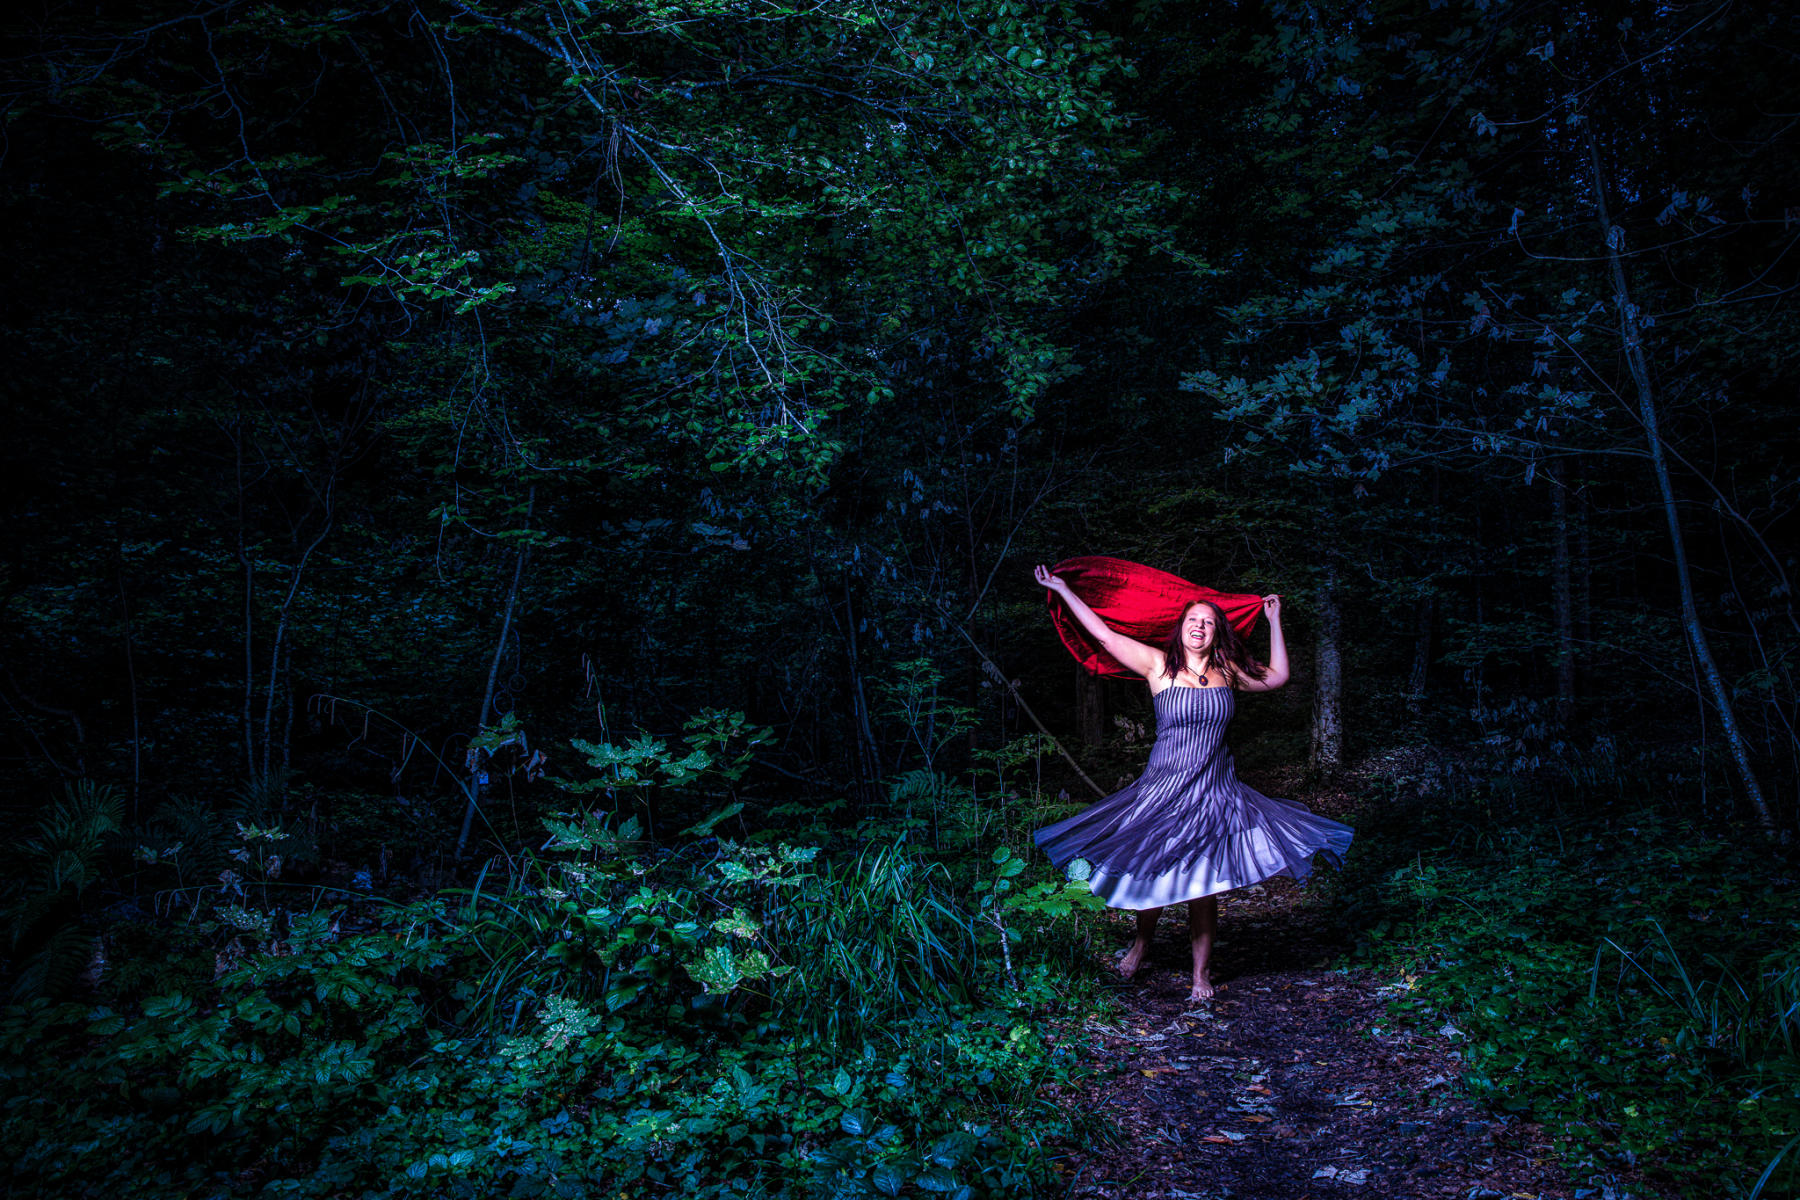 Into the Woods at Night, #3